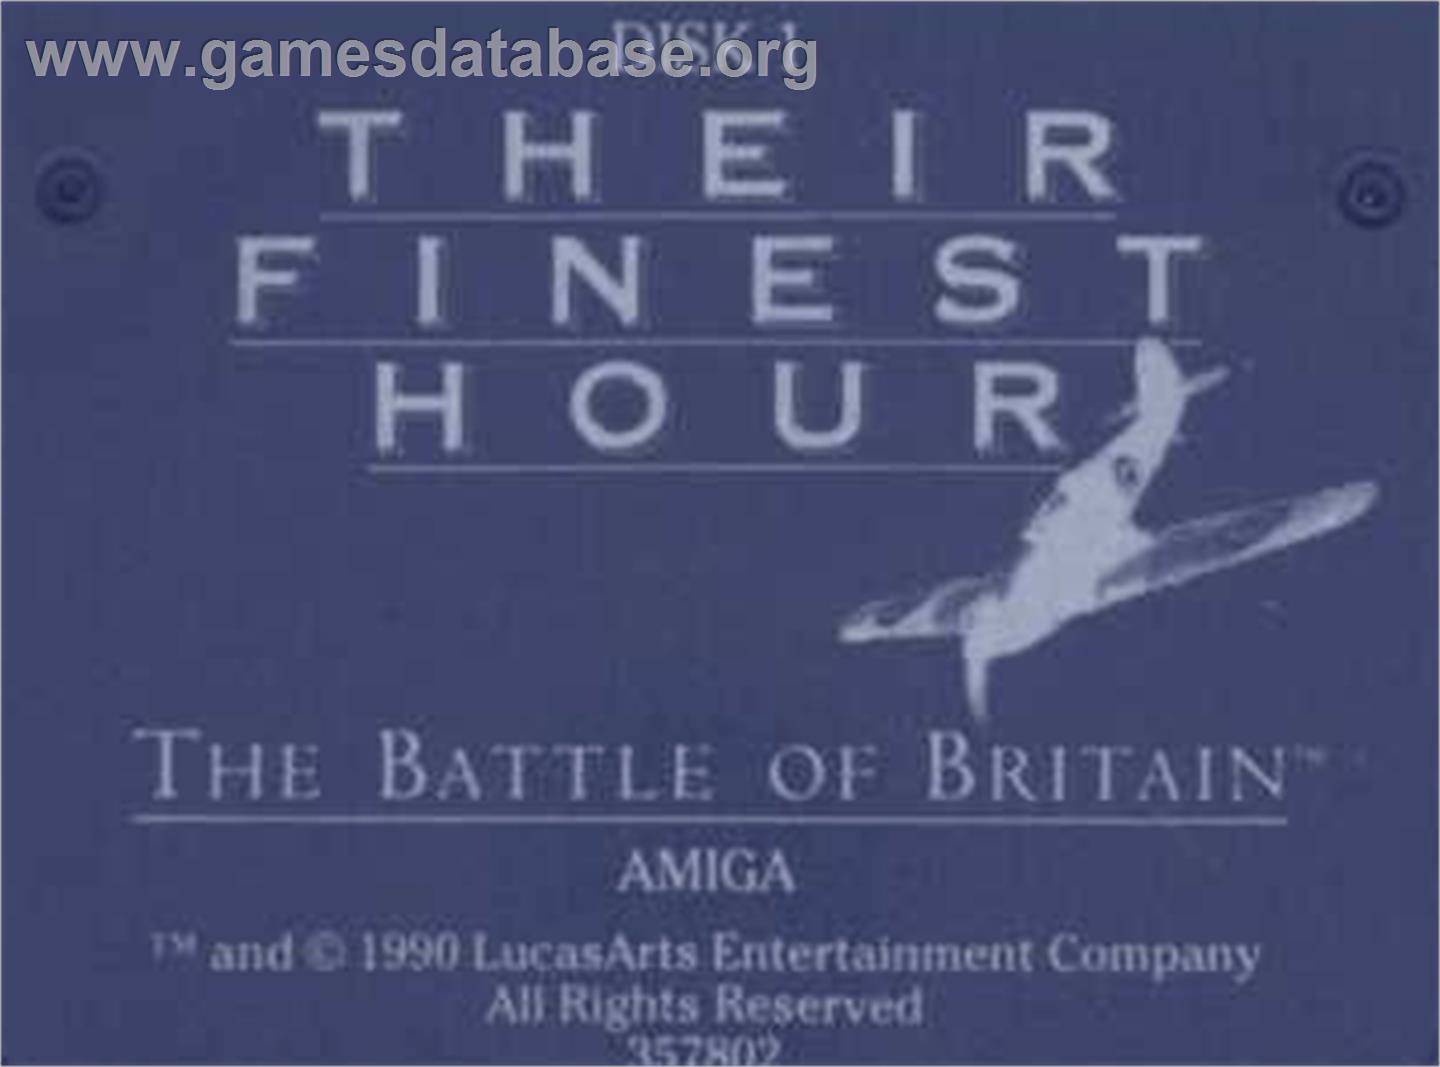 Their Finest Hour: The Battle of Britain - Commodore Amiga - Artwork - Cartridge Top